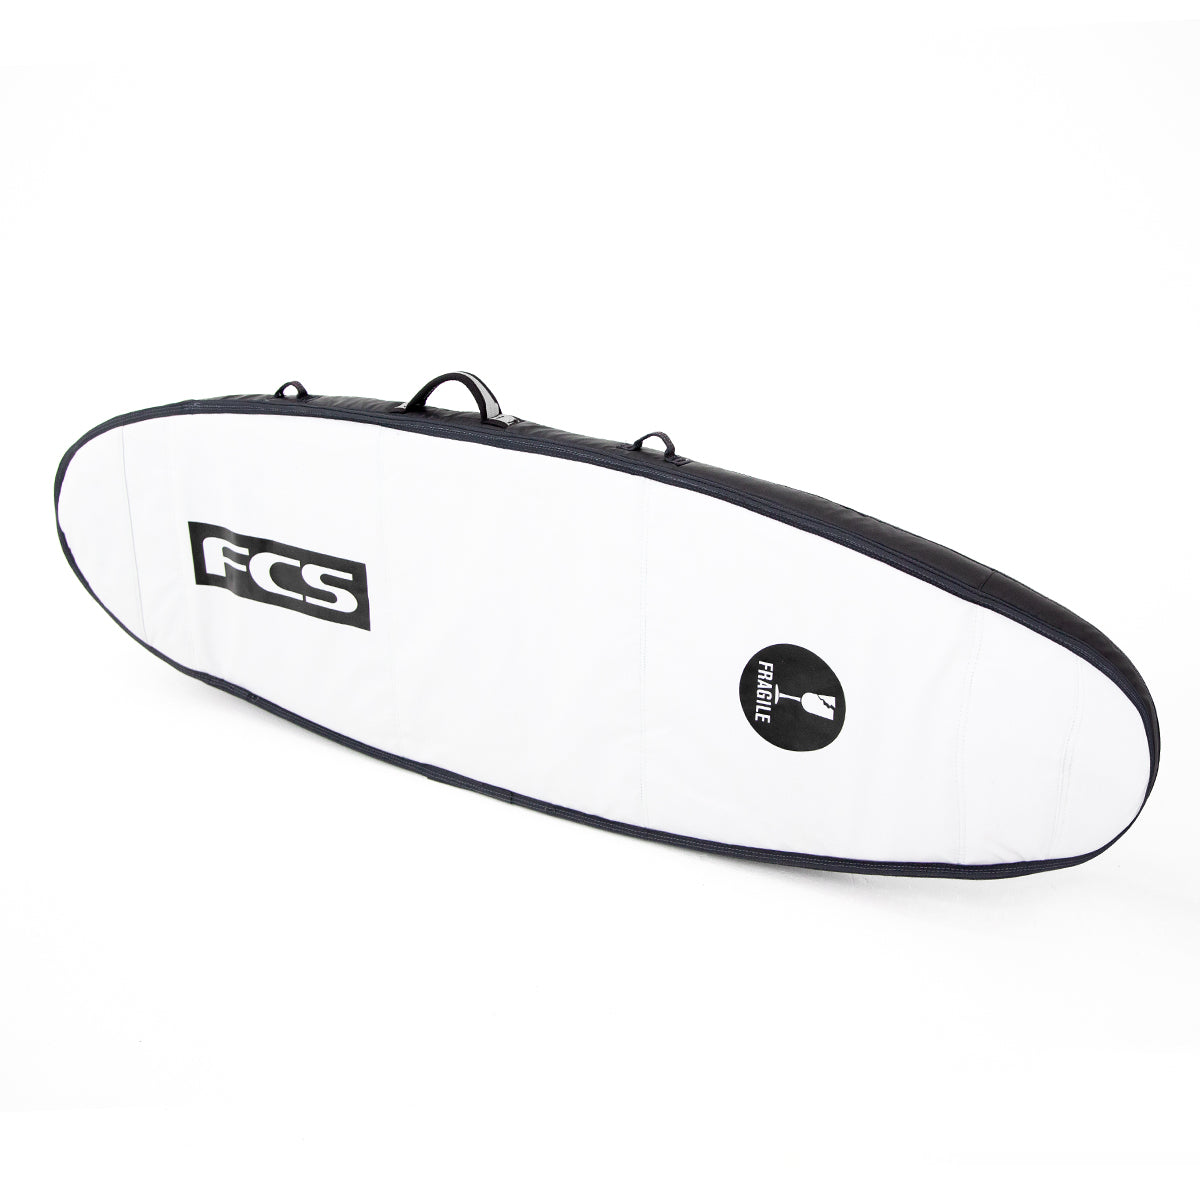 Triple Board Bag by NSP - Designed by Surfers for Surfers!